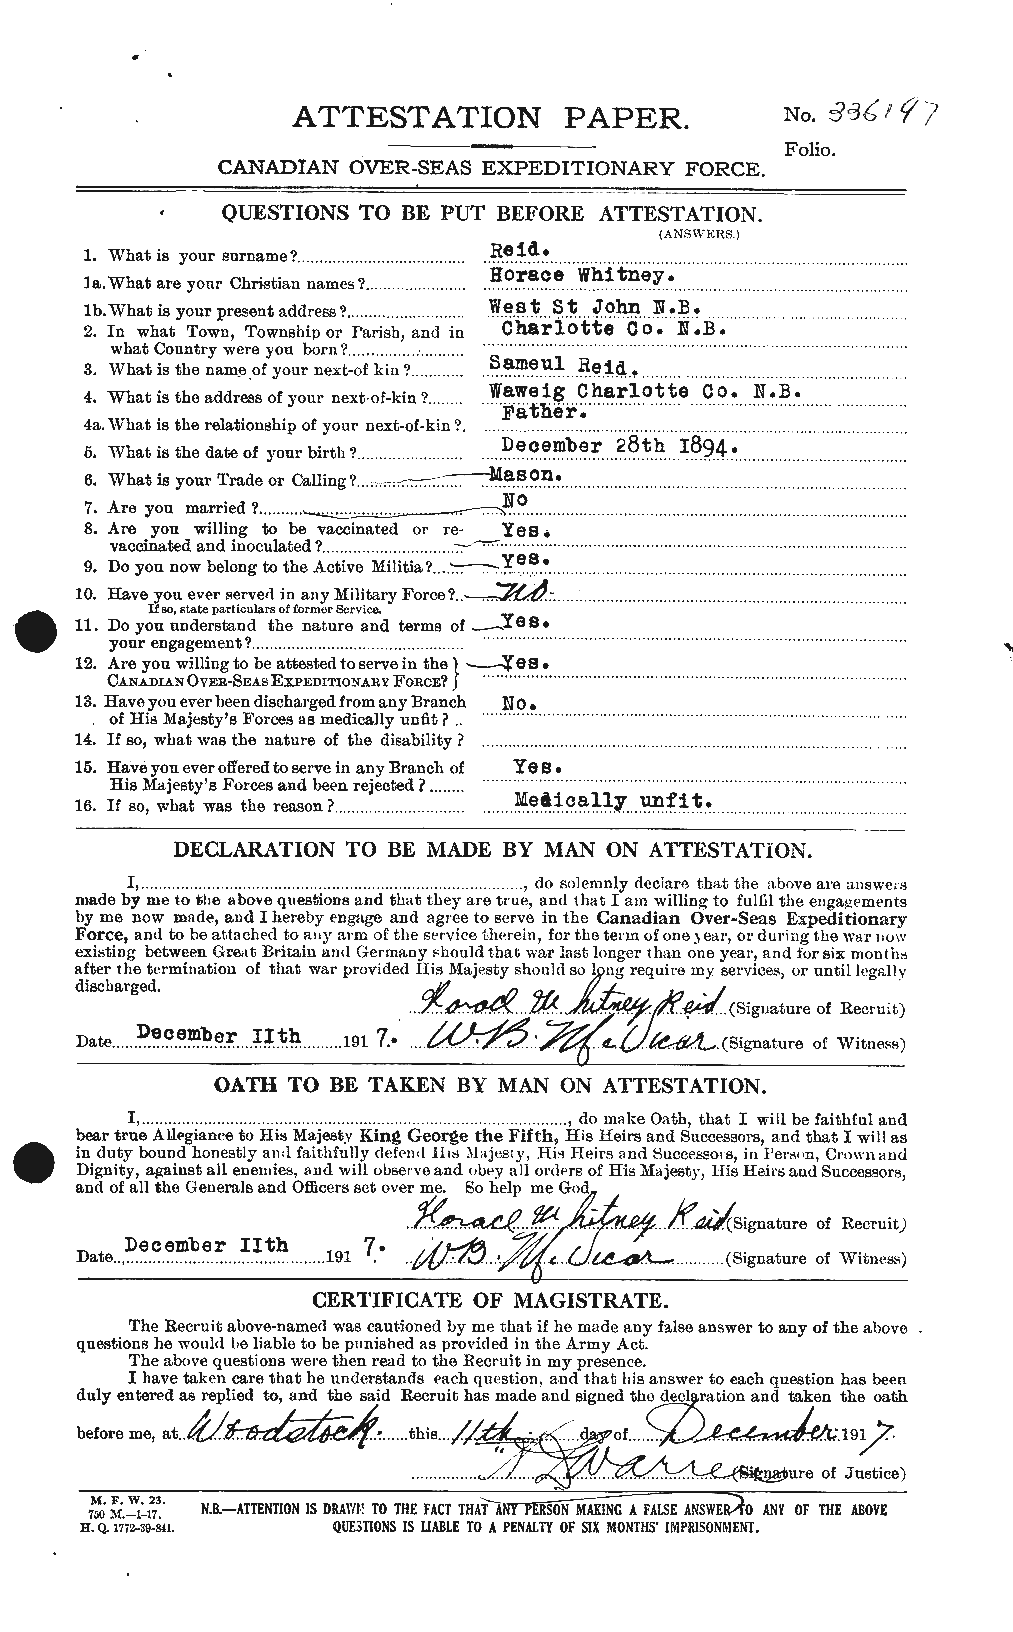 Personnel Records of the First World War - CEF 598613a